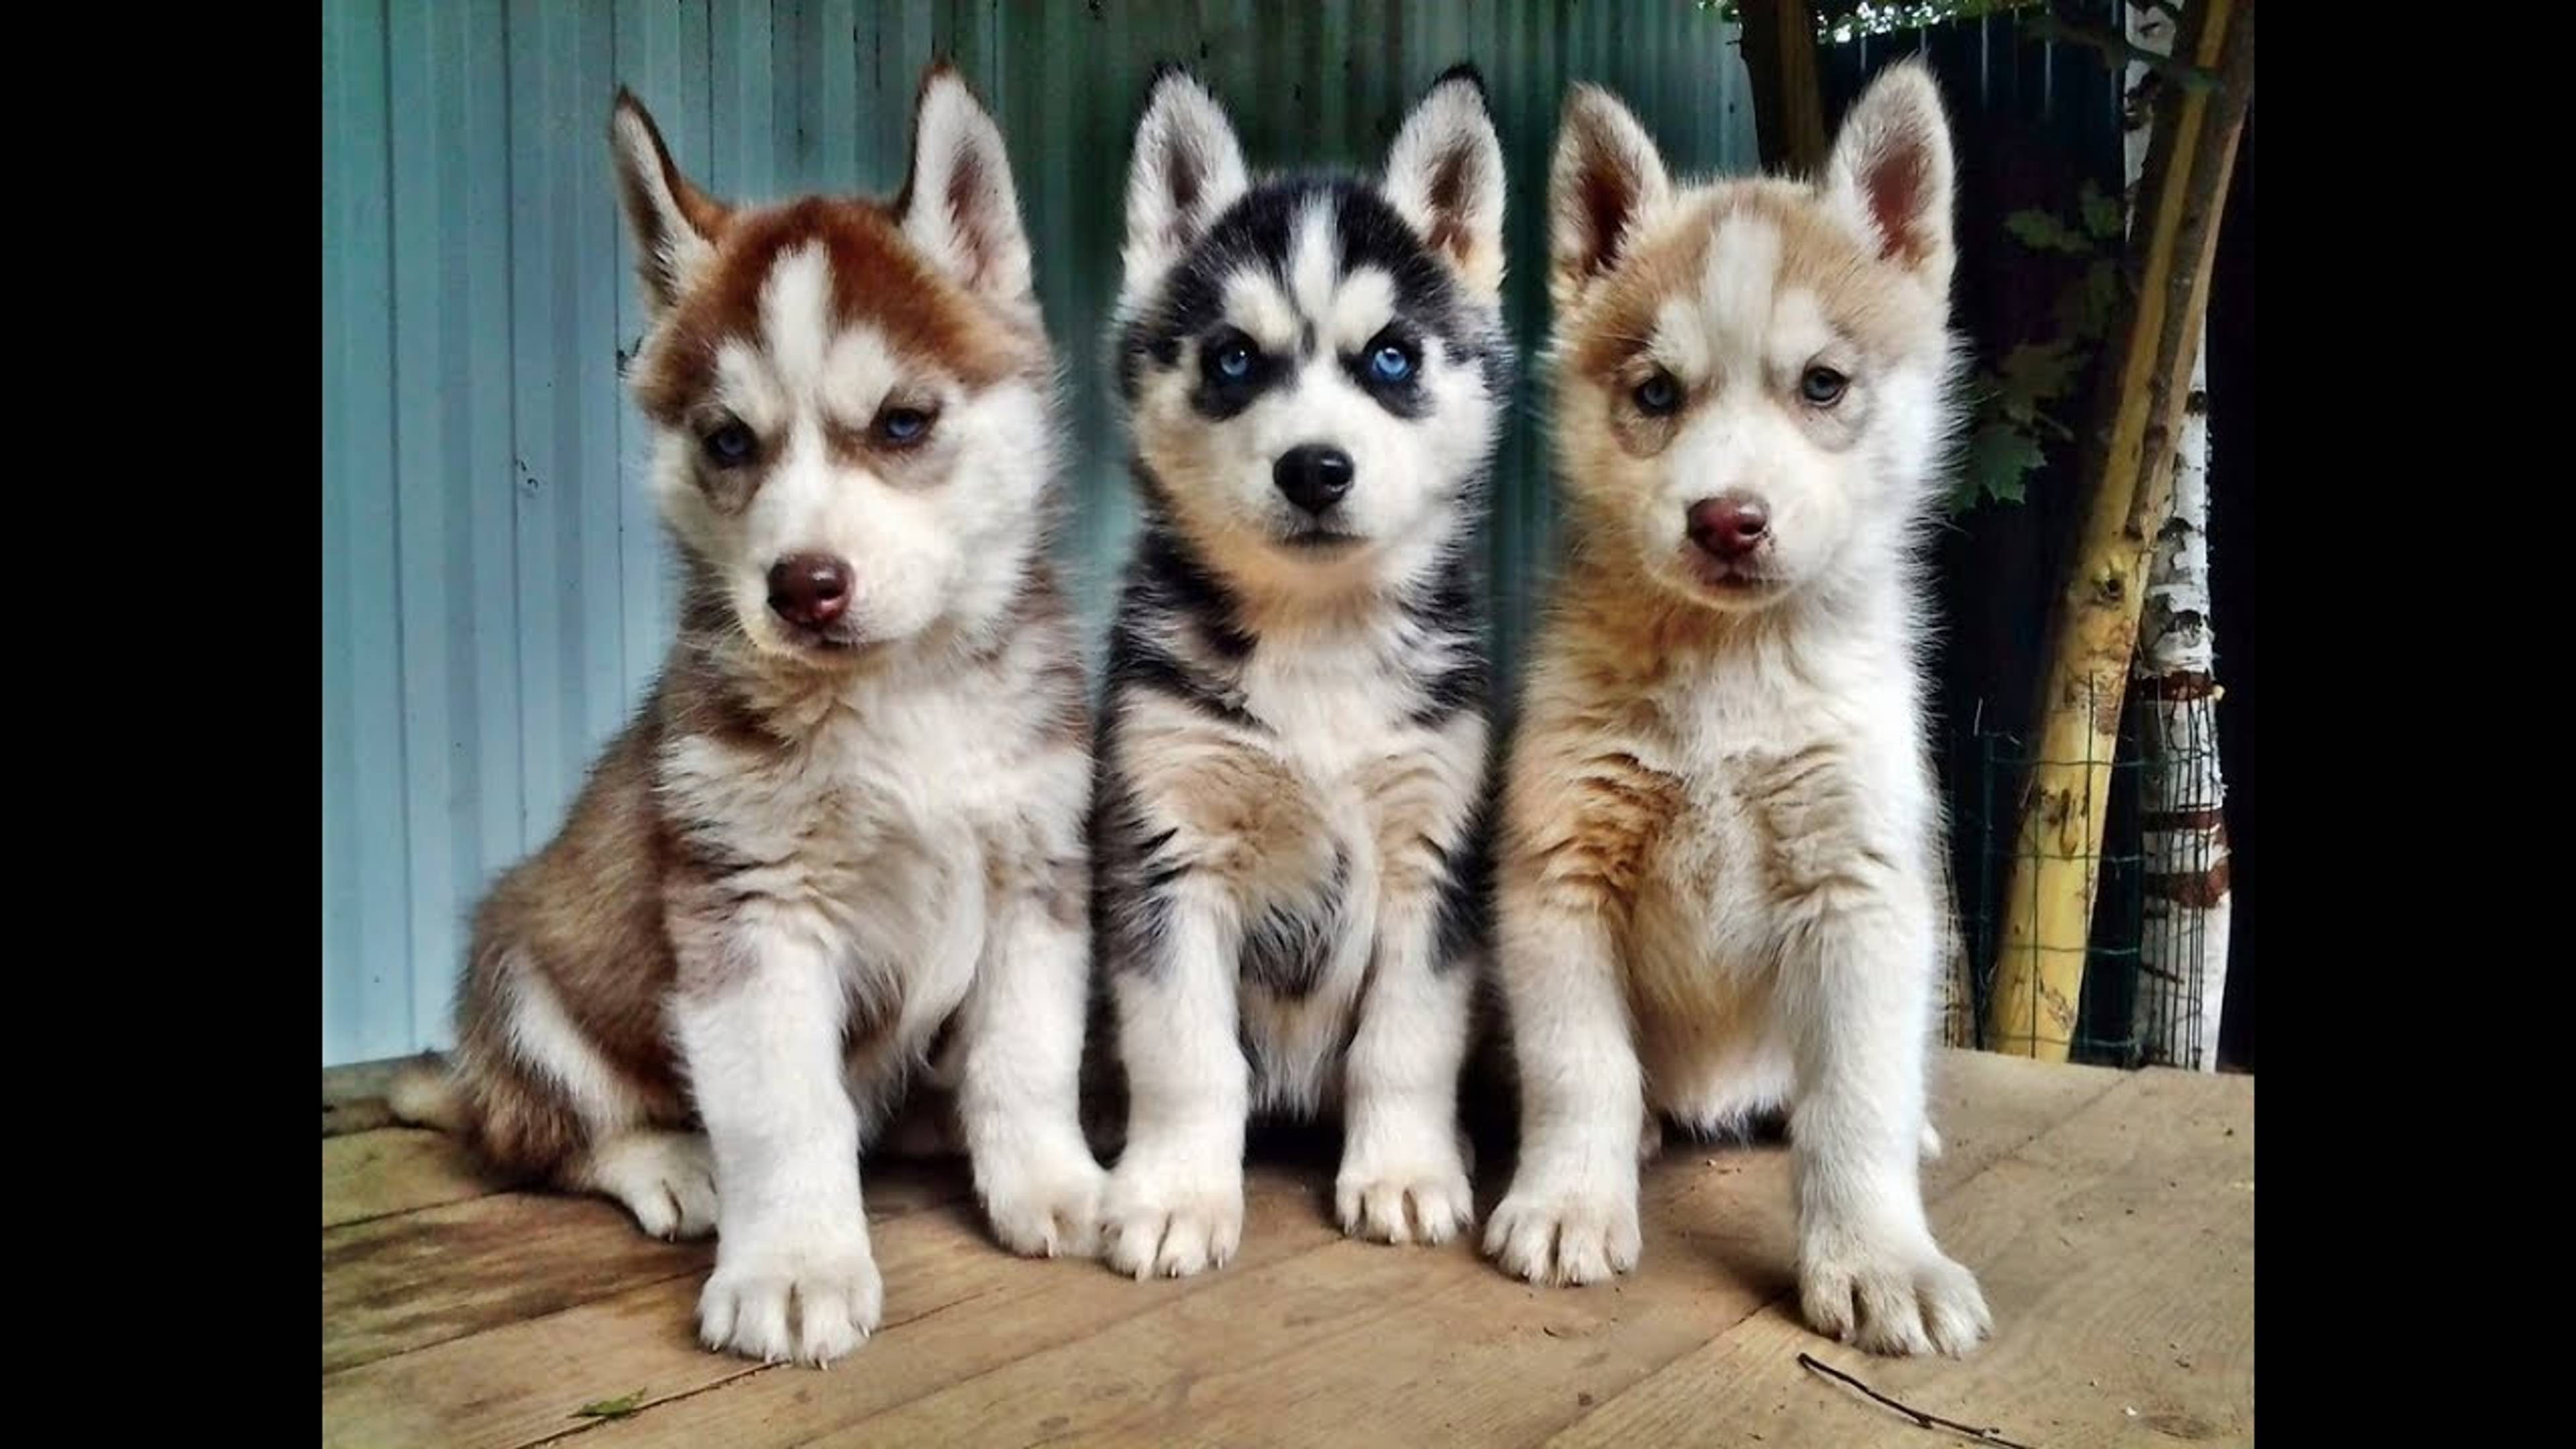 Husky kennel "From Lembolovo"